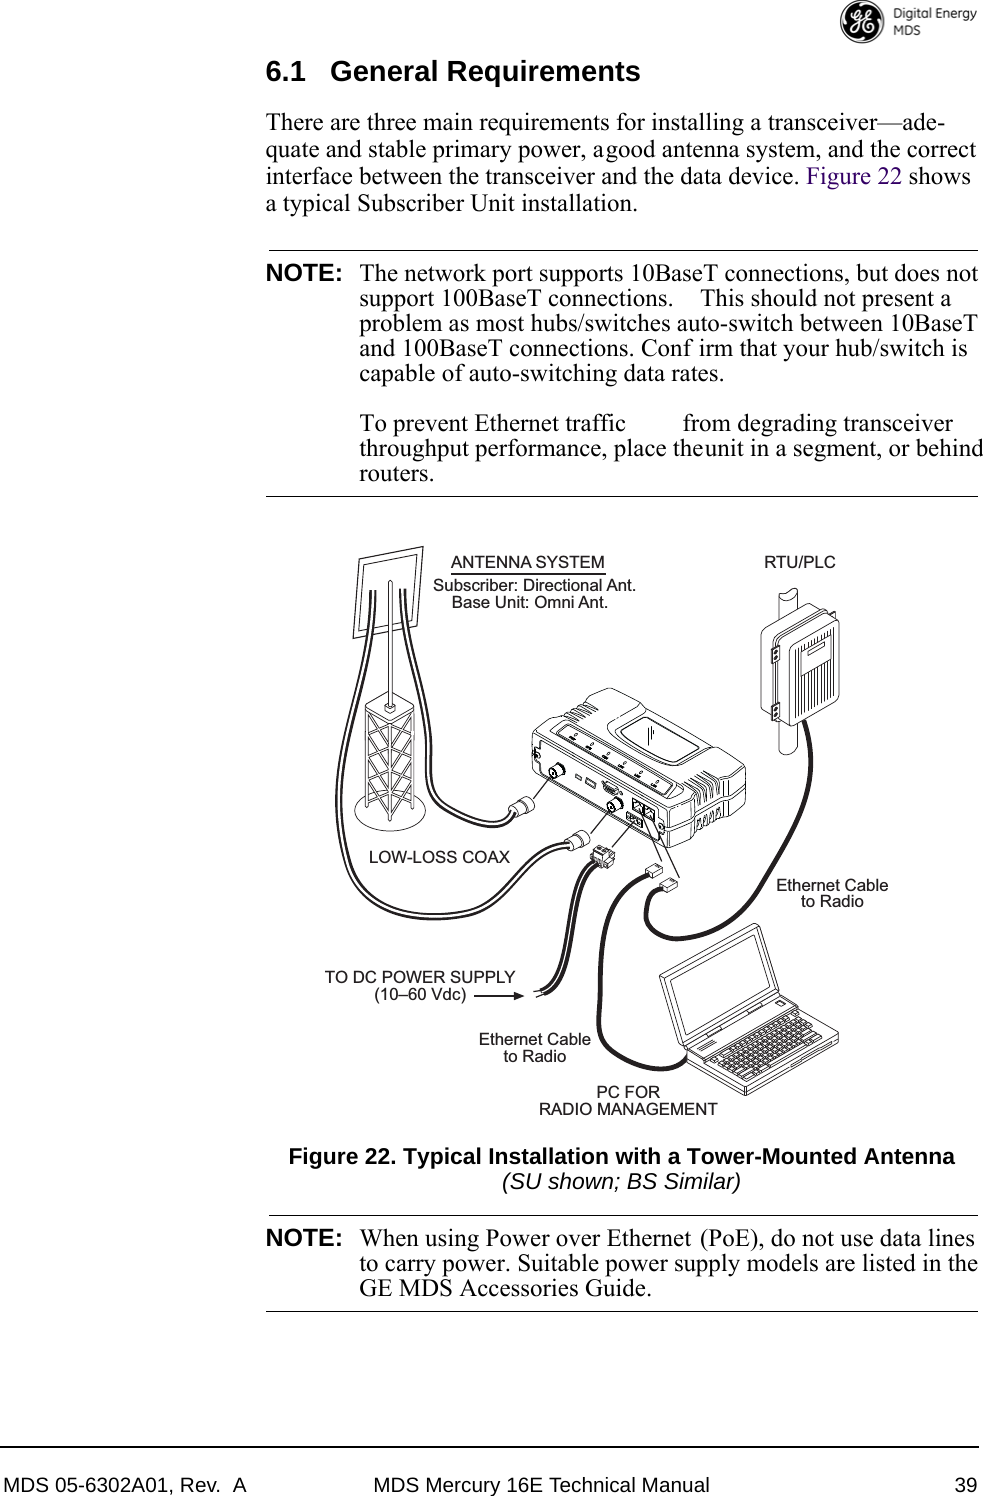 MDS 05-6302A01, Rev.  A MDS Mercury 16E Technical Manual 396.1 General RequirementsThere are three main requirements for installing a transceiver—ade-quate and stable primary power, a good antenna system, and the correct interface between the transceiver and the data device. Figure 22 shows a typical Subscriber Unit installation.NOTE: The network port supports 10BaseT connections, but does notsupport 100BaseT connections.  This should not present aproblem as most hubs/switches auto-switch between 10BaseTand 100BaseT connections. Conf irm that your hub/switch iscapable of auto-switching data rates.To prevent Ethernet traffic  from degrading transceiverthroughput performance, place the unit in a segment, or behindrouters.Invisible place holderFigure 22. Typical Installation with a Tower-Mounted Antenna(SU shown; BS Similar)NOTE: When using Power over Ethernet (PoE), do not use data linesto carry power. Suitable power supply models are listed in theGE MDS Accessories Guide.ANTENNA SYSTEMSubscriber: Directional Ant.    Base Unit: Omni Ant.TO DC POWER SUPPLY(1060 Vdc)RTU/PLCLOW-LOSS COAXPC FORRADIO MANAGEMENTEthernet Cableto RadioEthernet Cableto Radio